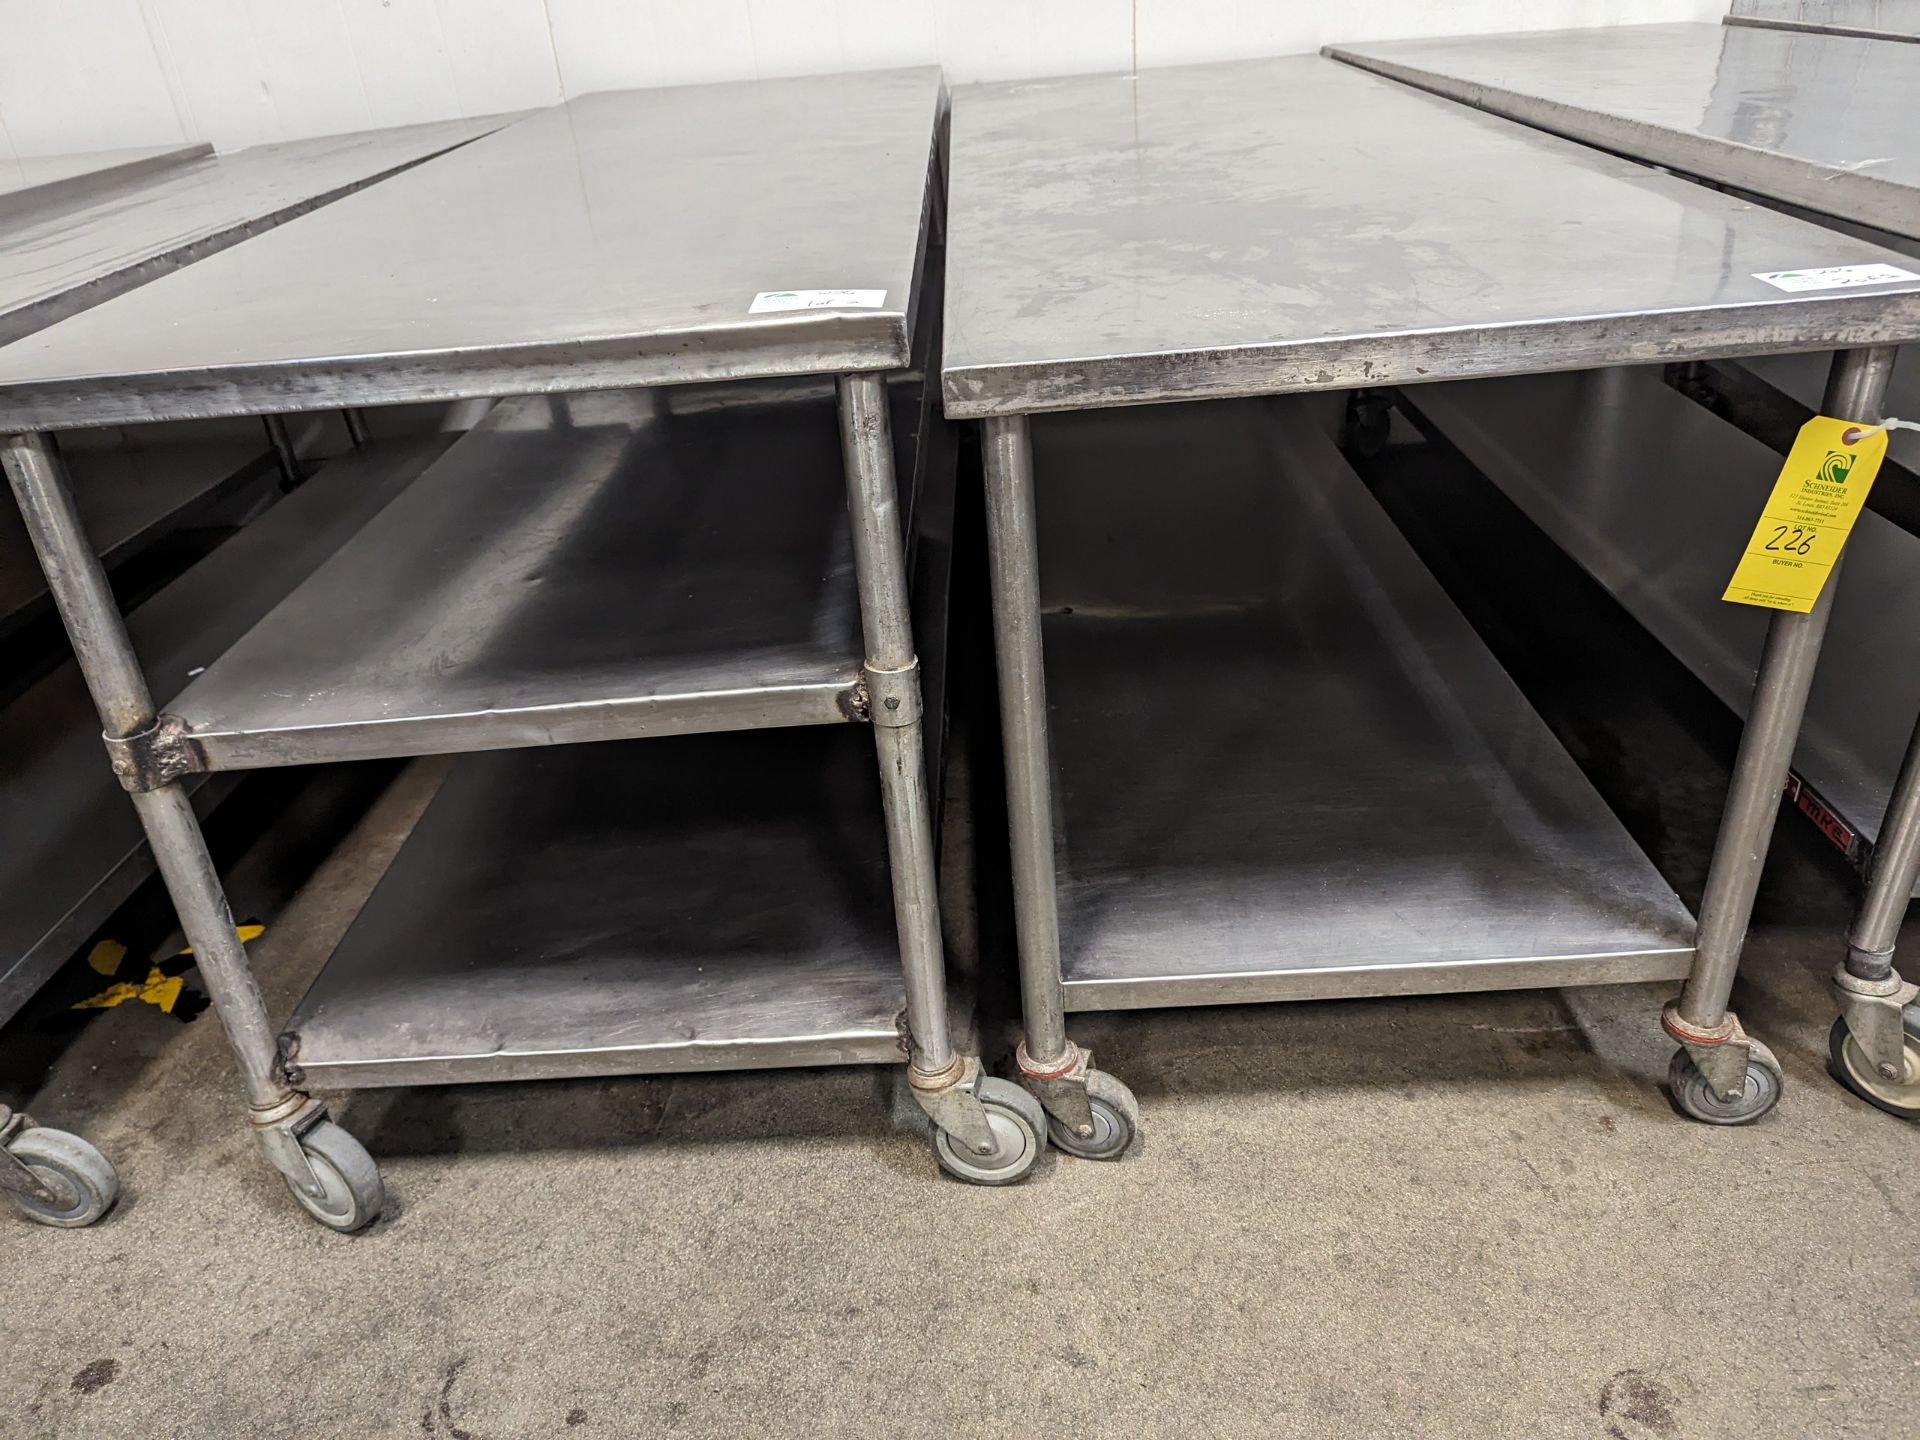 Lot of 2 7ft Long SS Tables, Dimensions LxWxH: 84x30x36 each - Image 6 of 6